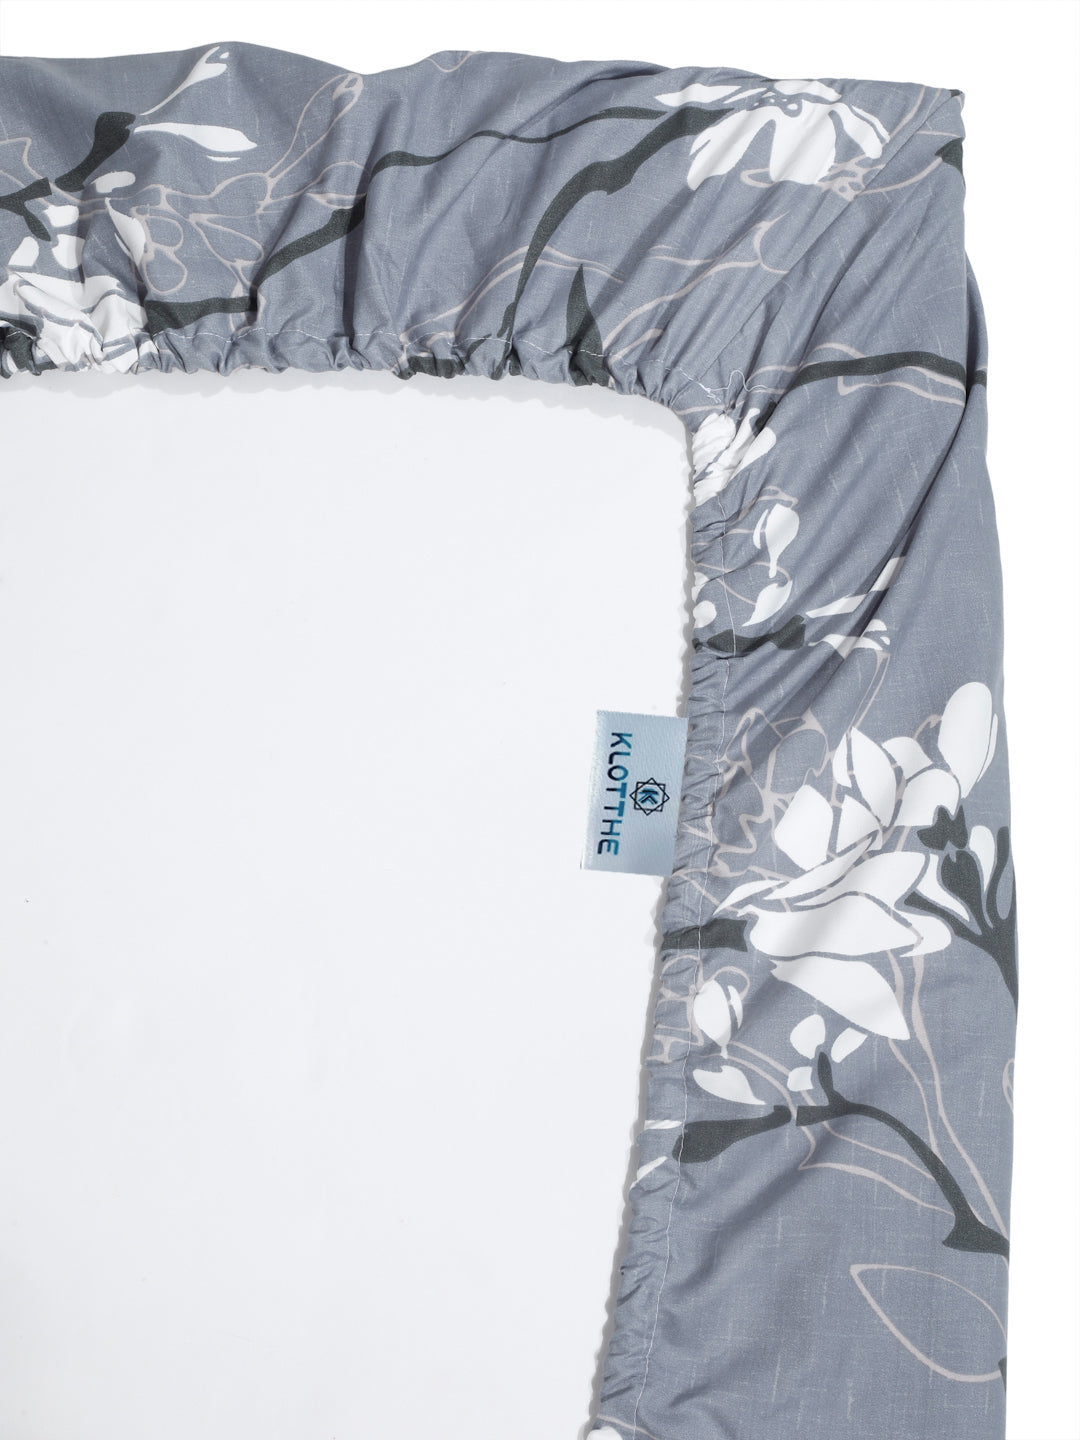 Klotthe Grey Floral 300 TC Cotton Blend Fitted Super King Double Bedsheet in Book Fold Packing